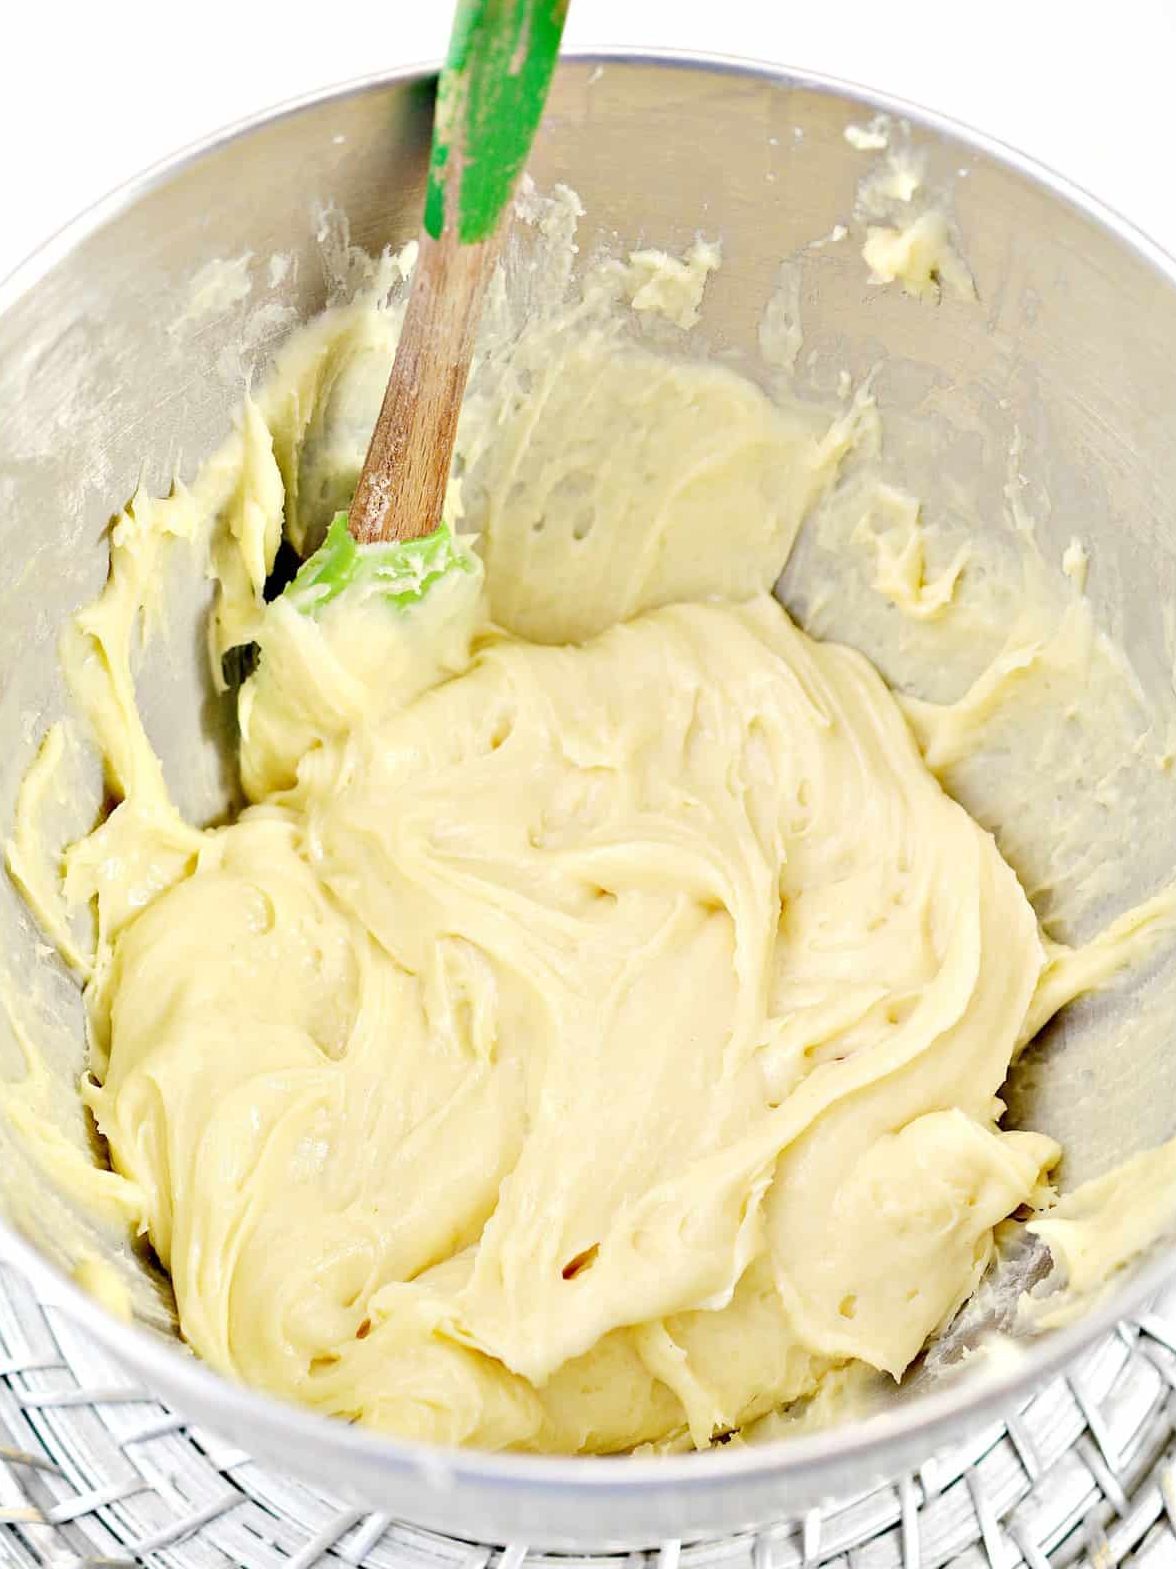 Mix the eggs into the dough one at a time. Be sure each egg is completely combined before adding another.